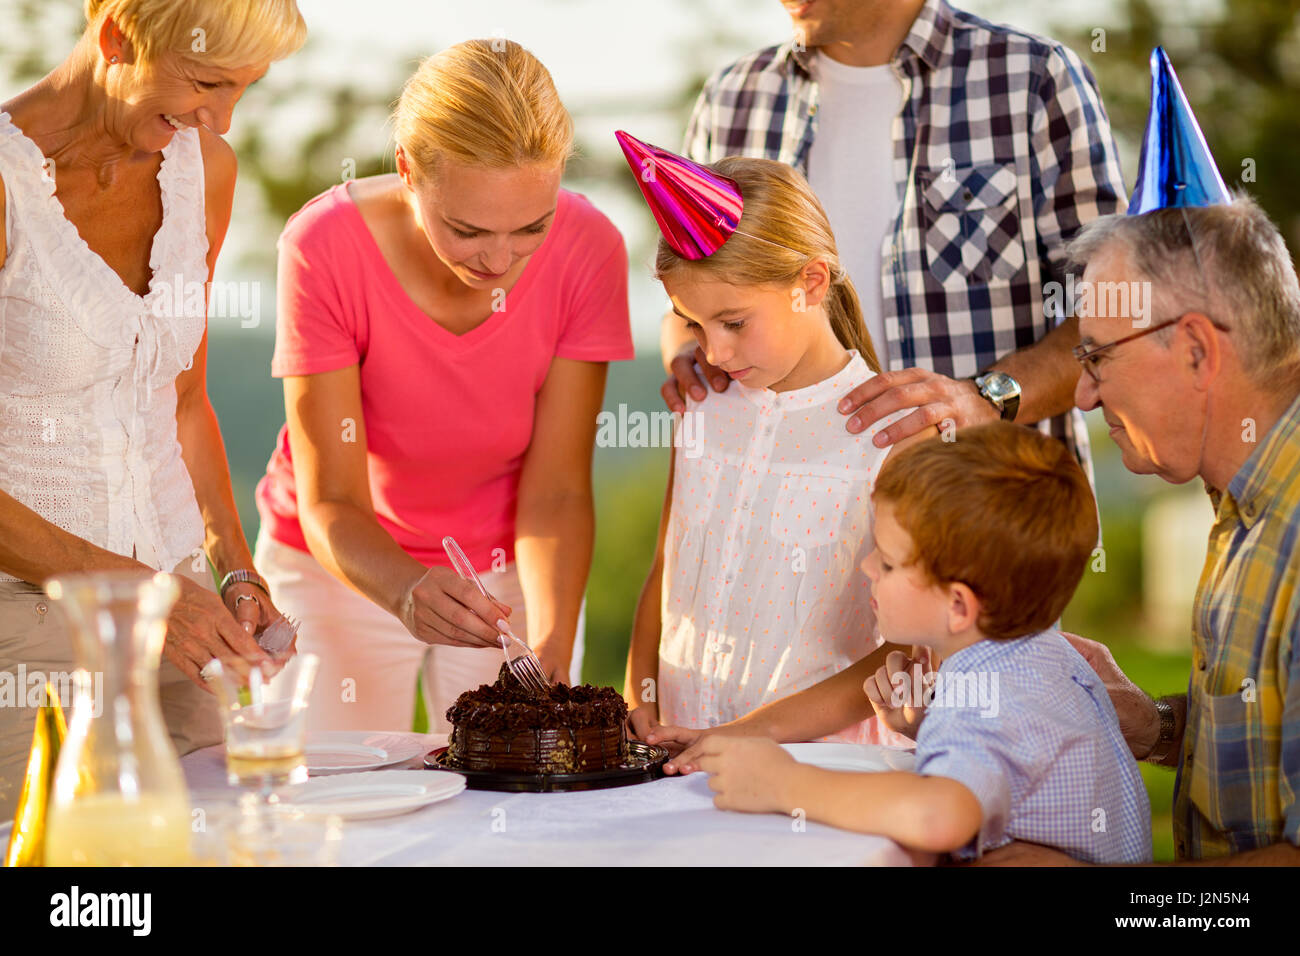 Family eating the birthday cake together Stock Photo